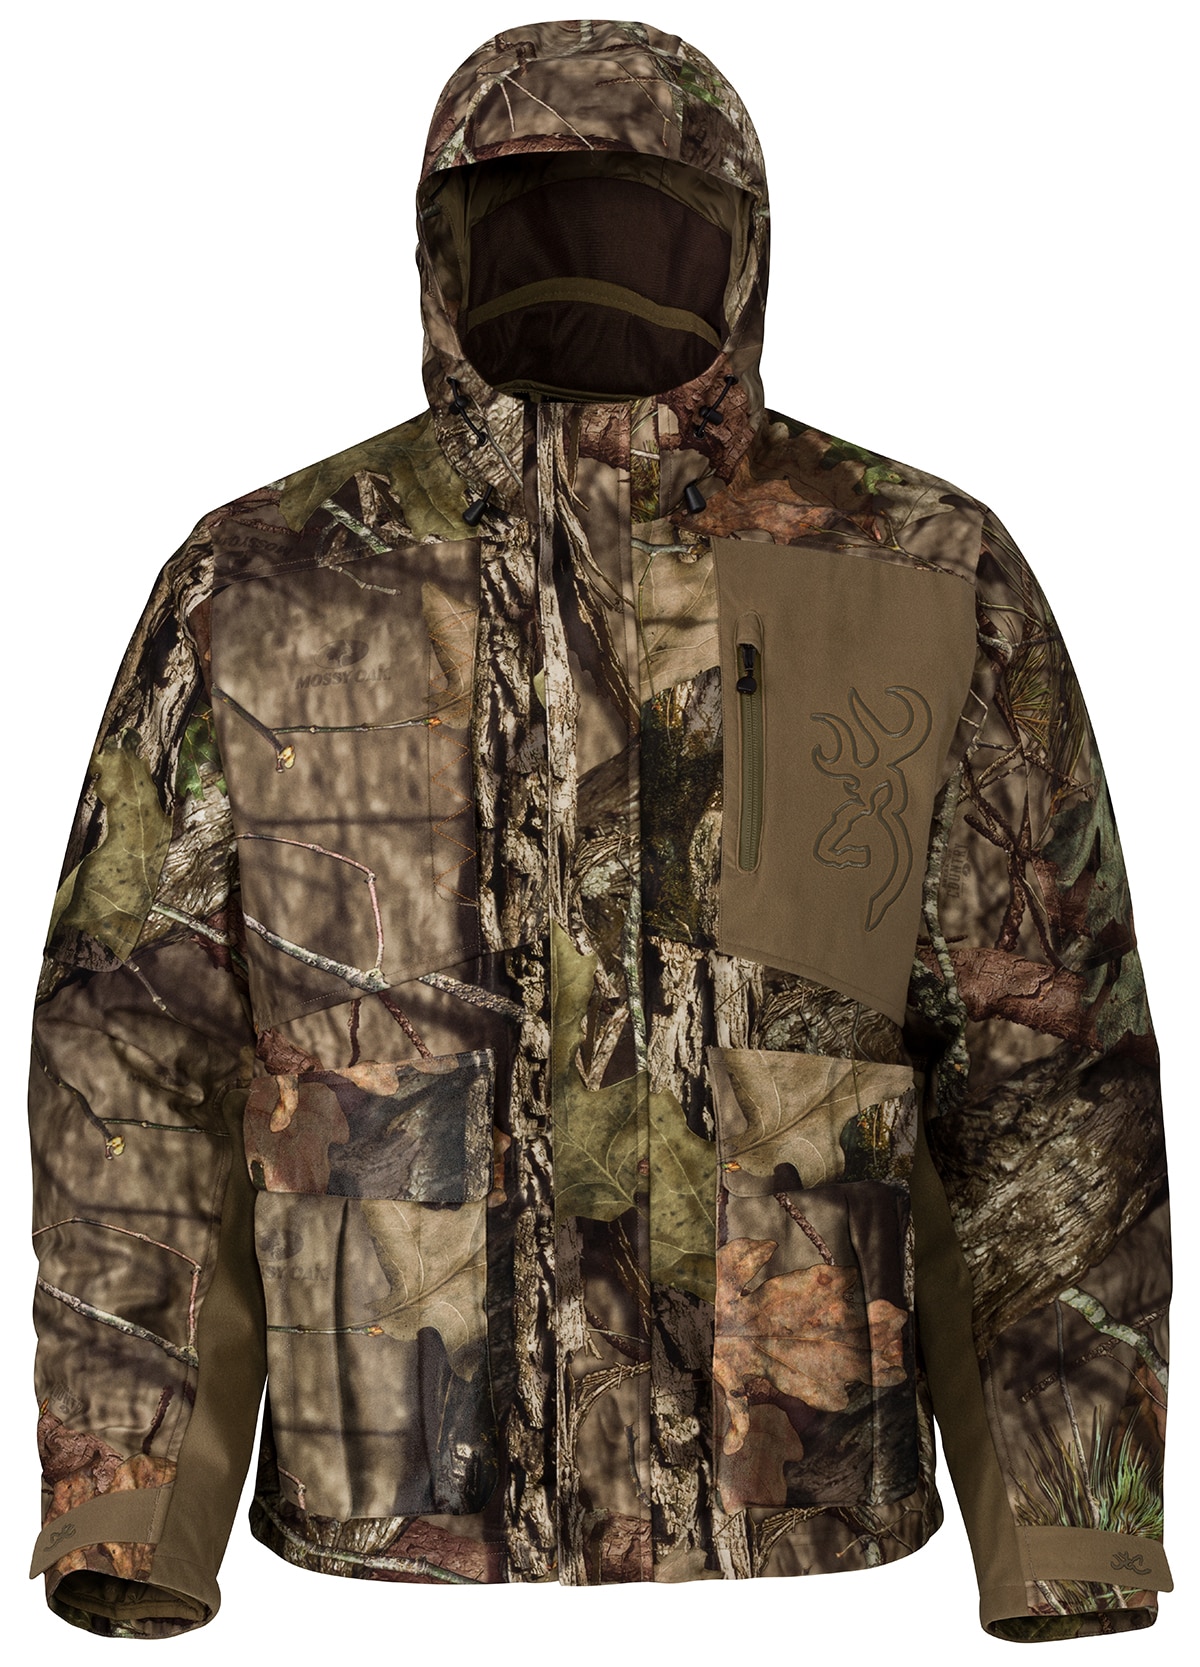 The Hell's Canyon BTU Parka for men by Browning. (Photo: Browning)